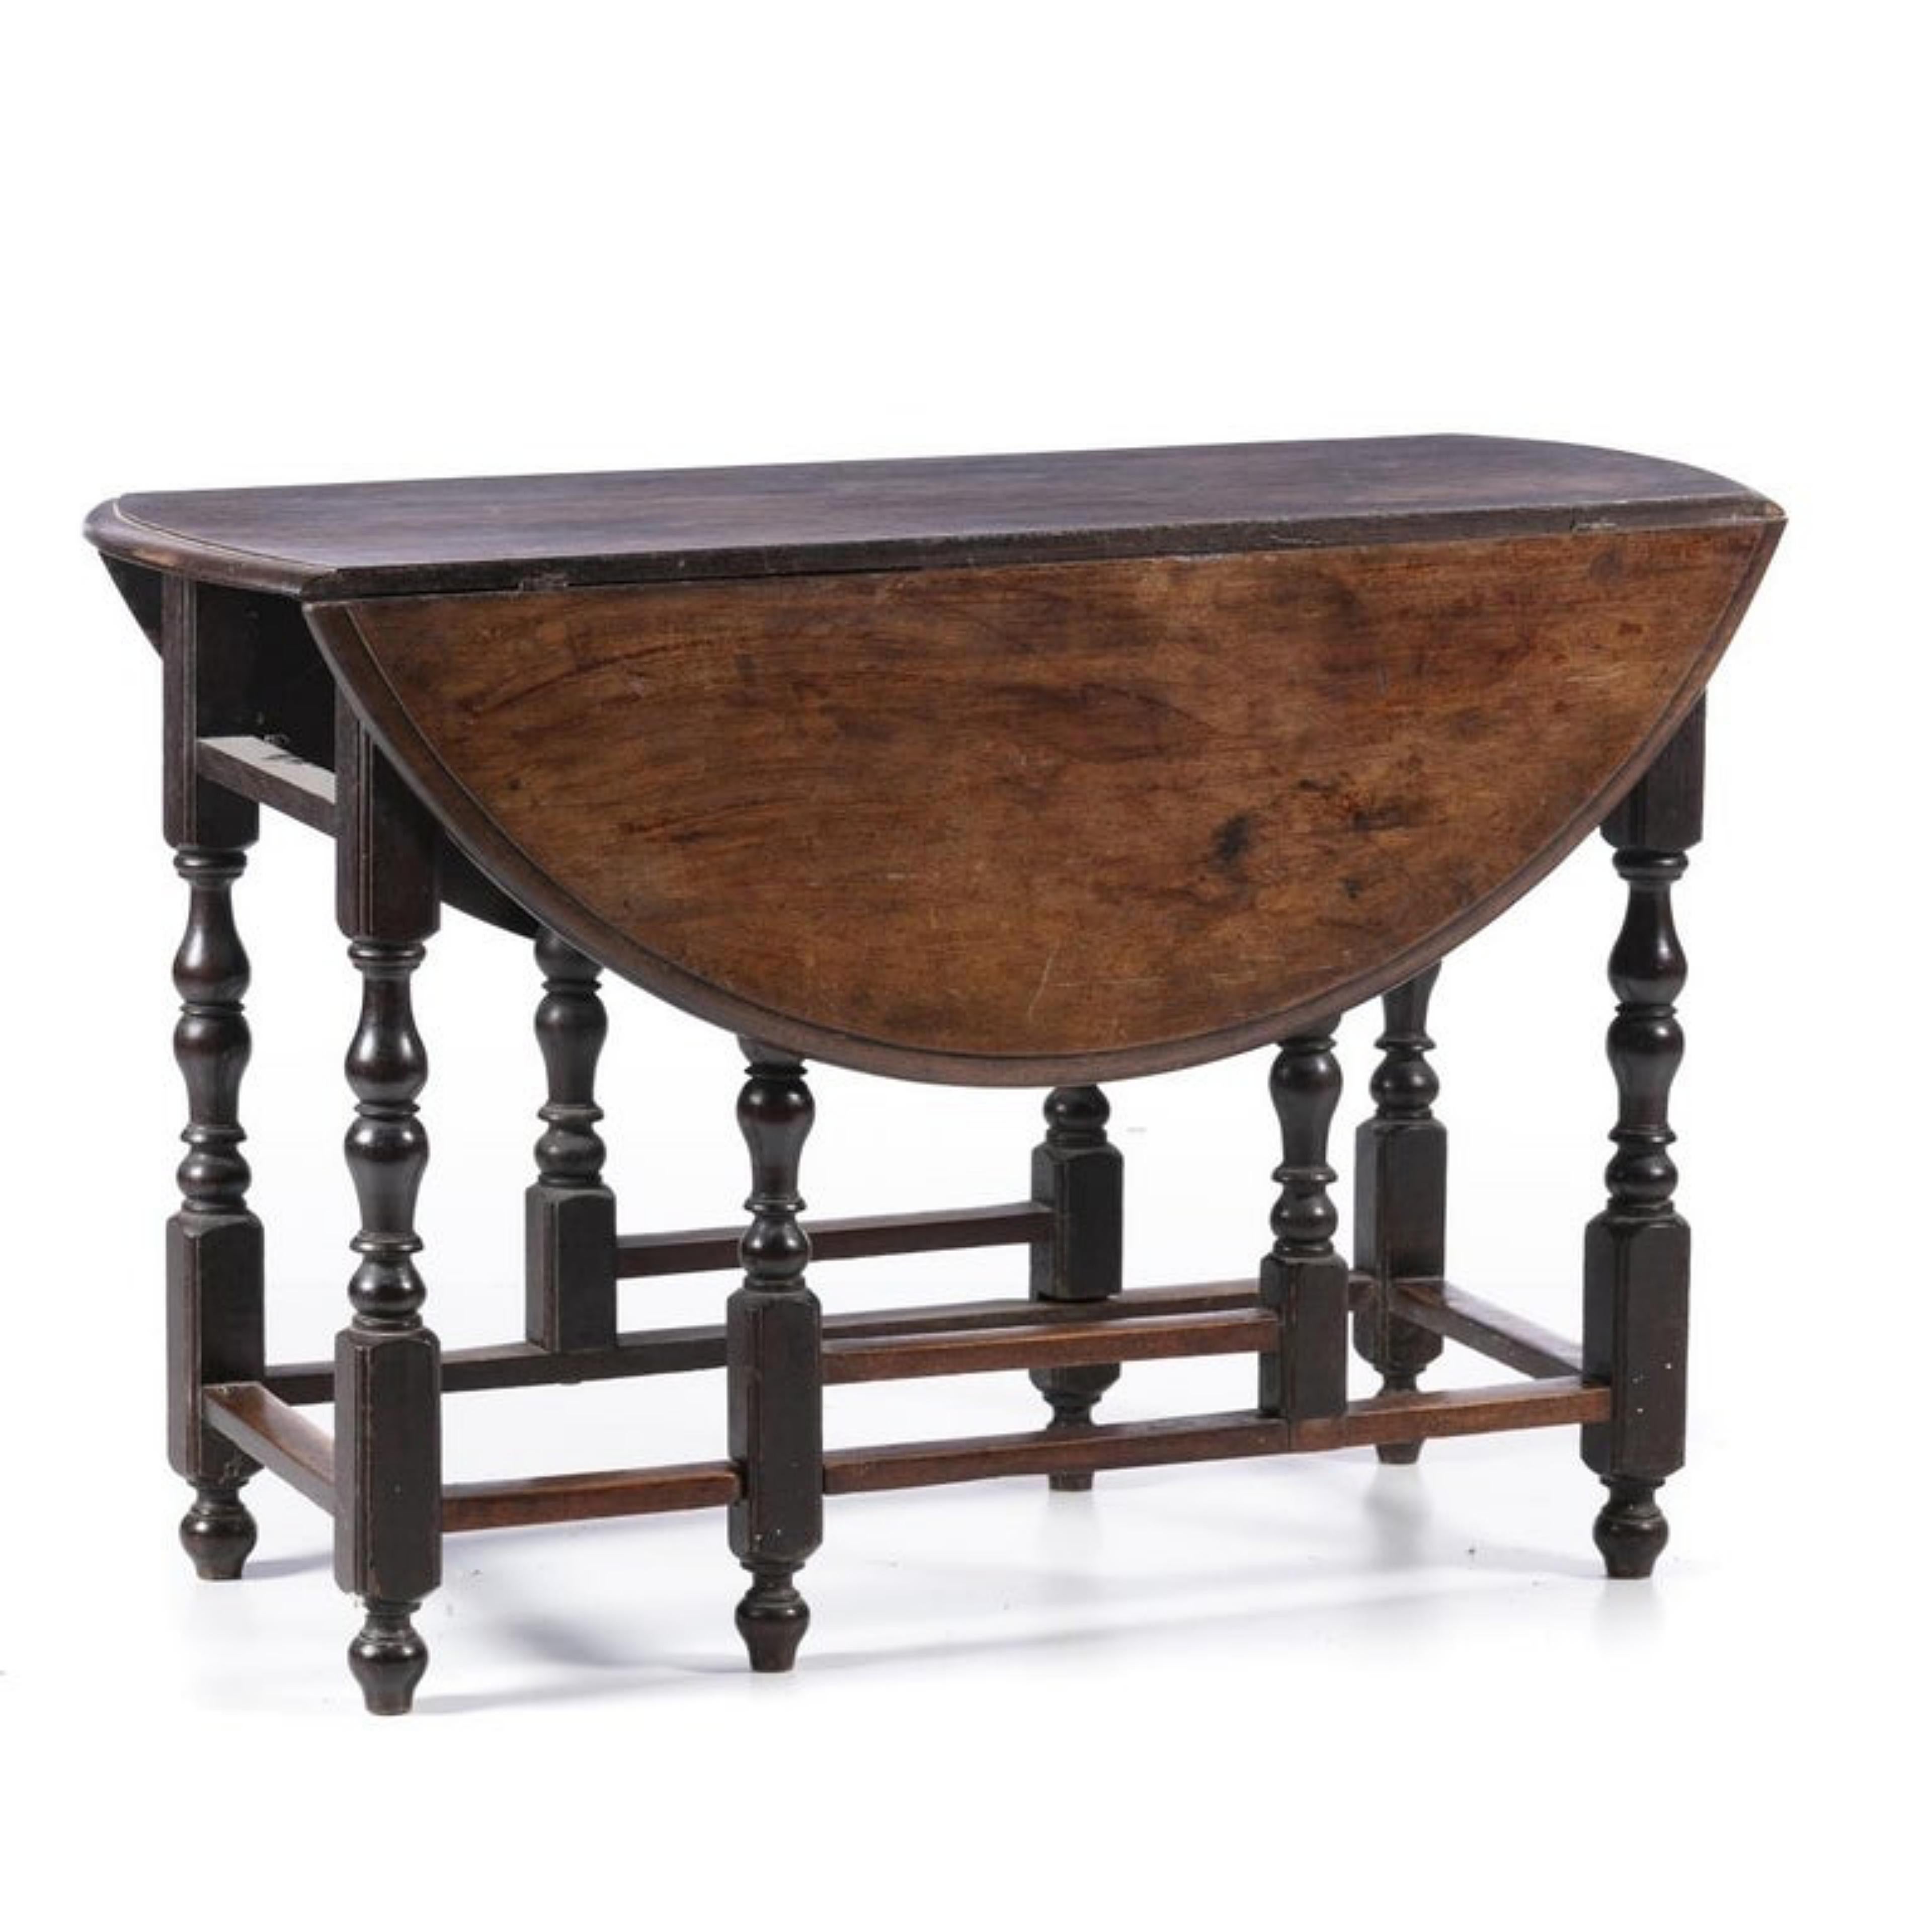 Tab table
Portuguese from the 17th century, in mahogany wood. Circular-shaped top, waist with two drawers, turned legs, two of which are gates. Missing drawers. Dim.: (open) 81 x 118 x 124 cm.; Dim.: (closed) 81 x 118 x 48 cm.
Good condition.